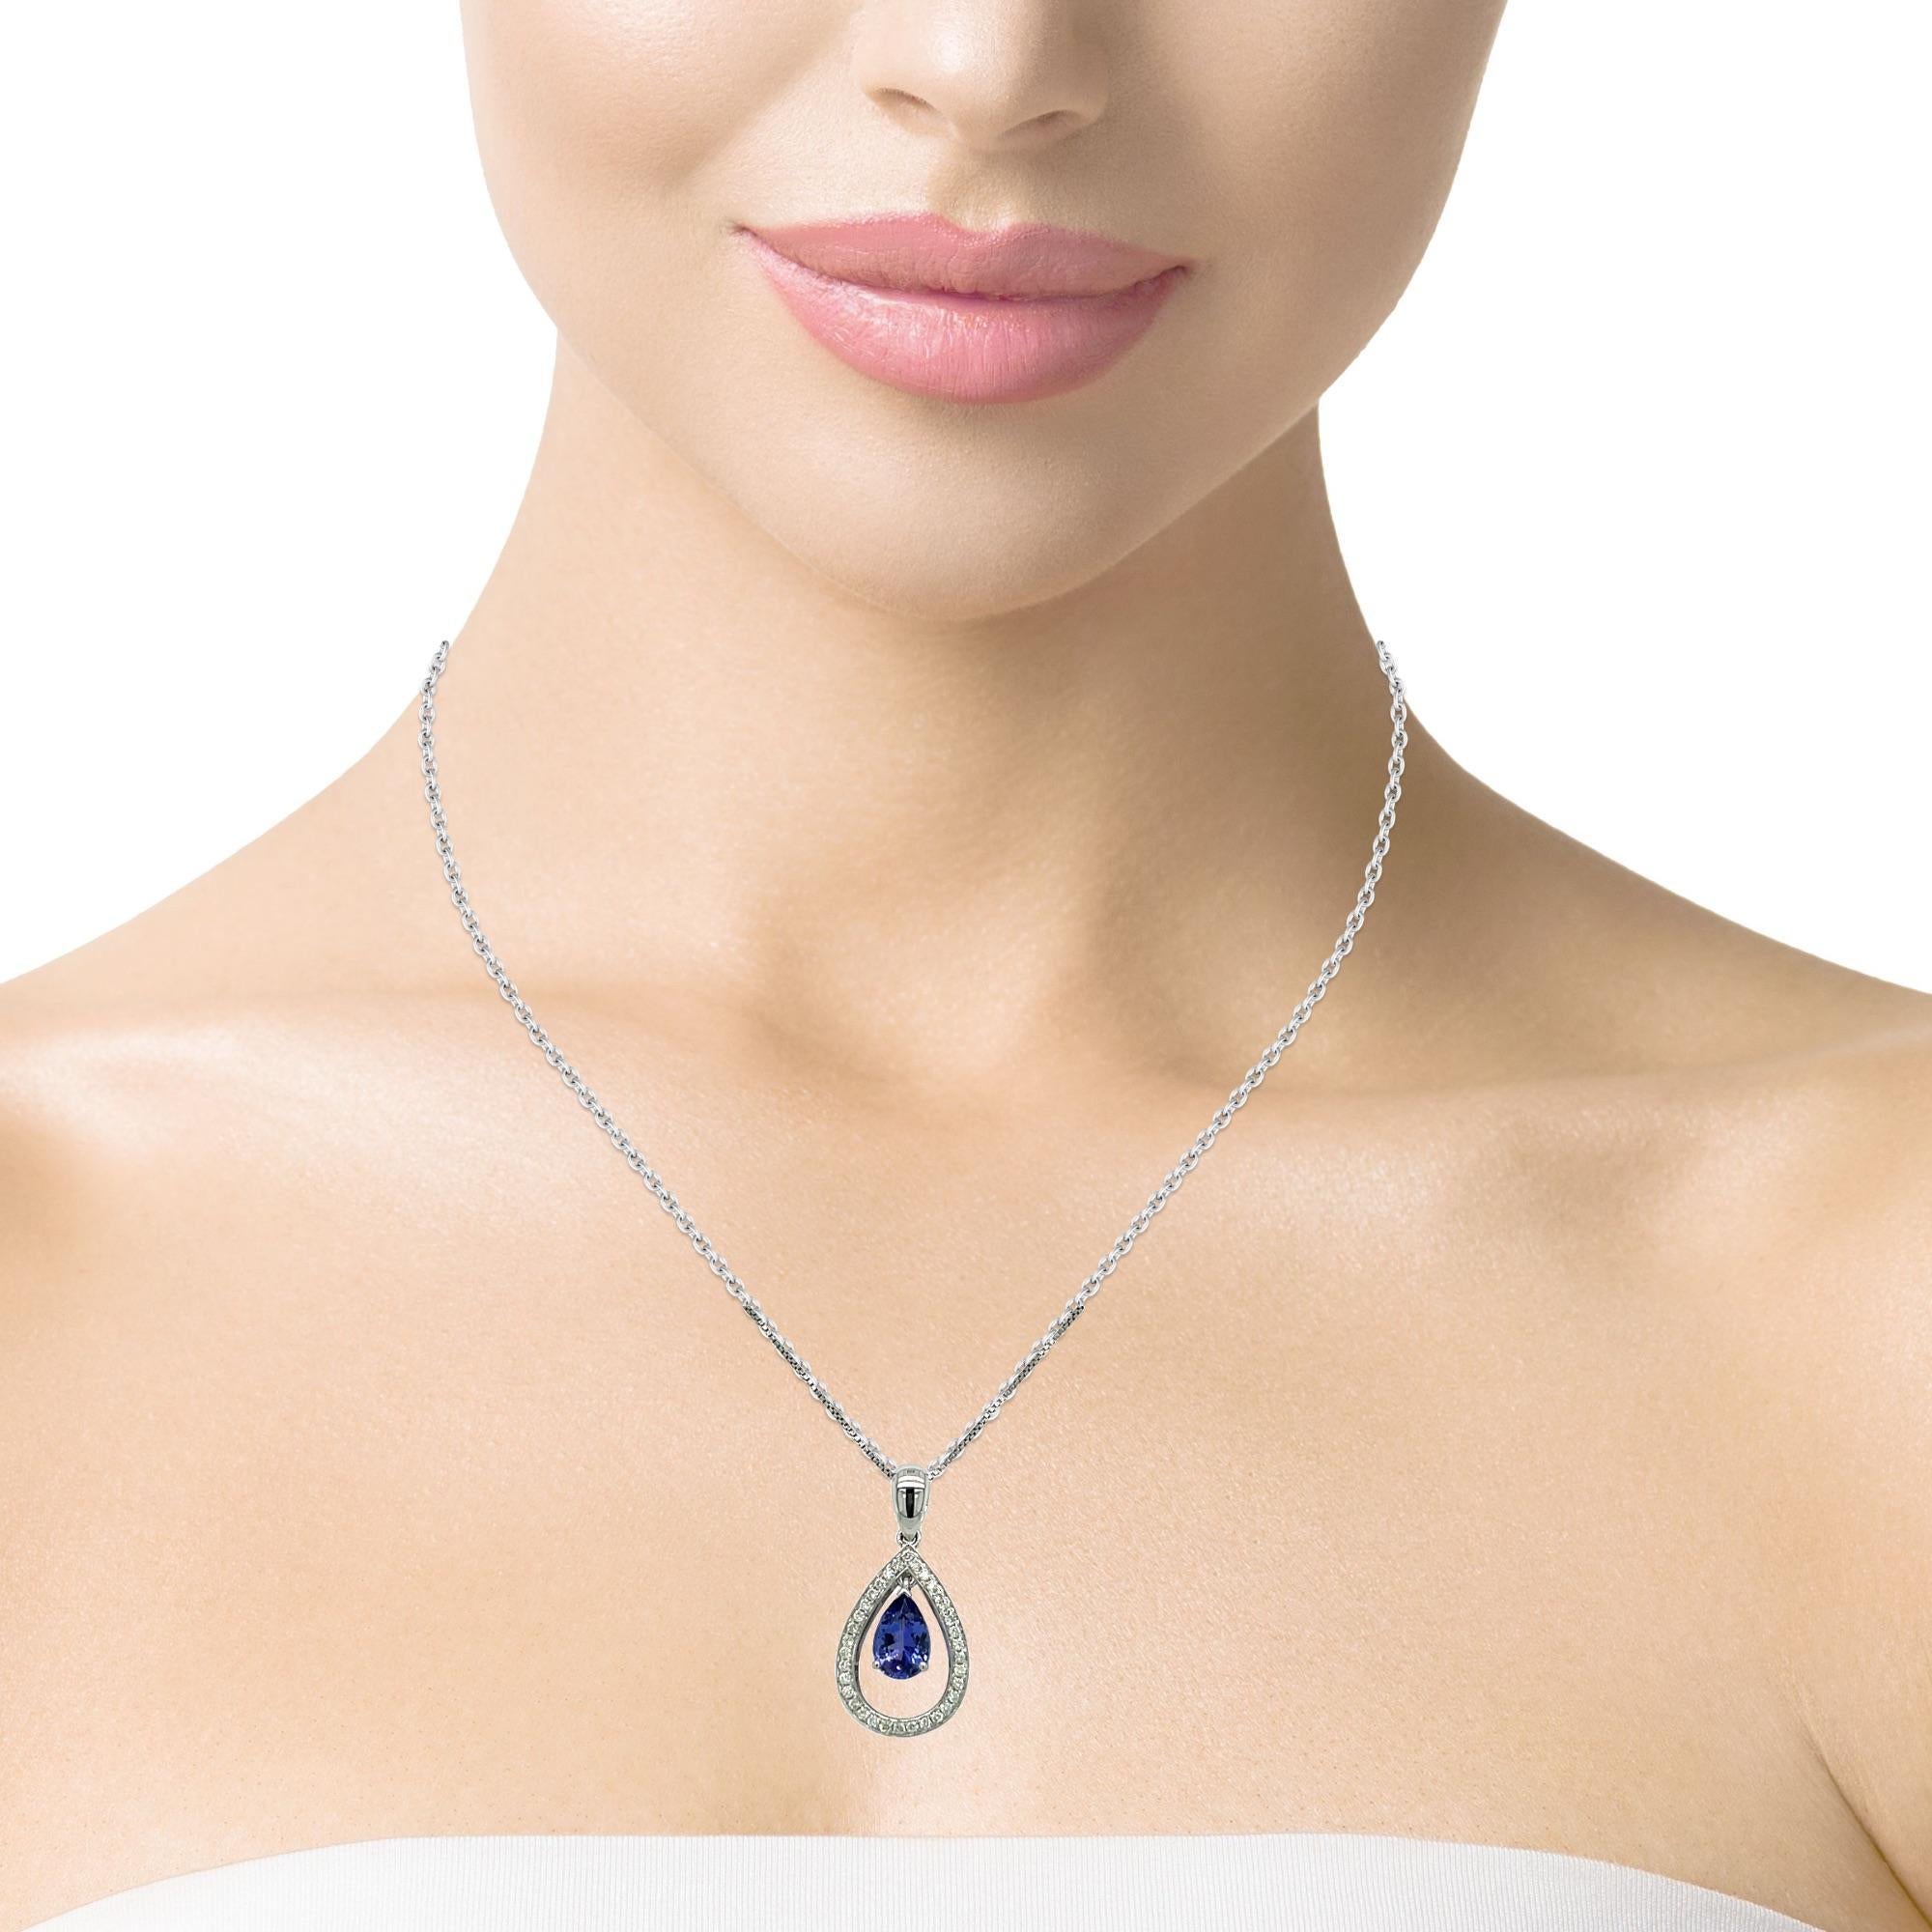 This stunning solitaire tear drop AAA quality Tanzanite pendant is surrounded by top quality shimmering brilliant cut diamonds. Comes with a gold chain. Pendant is brand new with tags attached. It comes in a beautiful box ready for the perfect